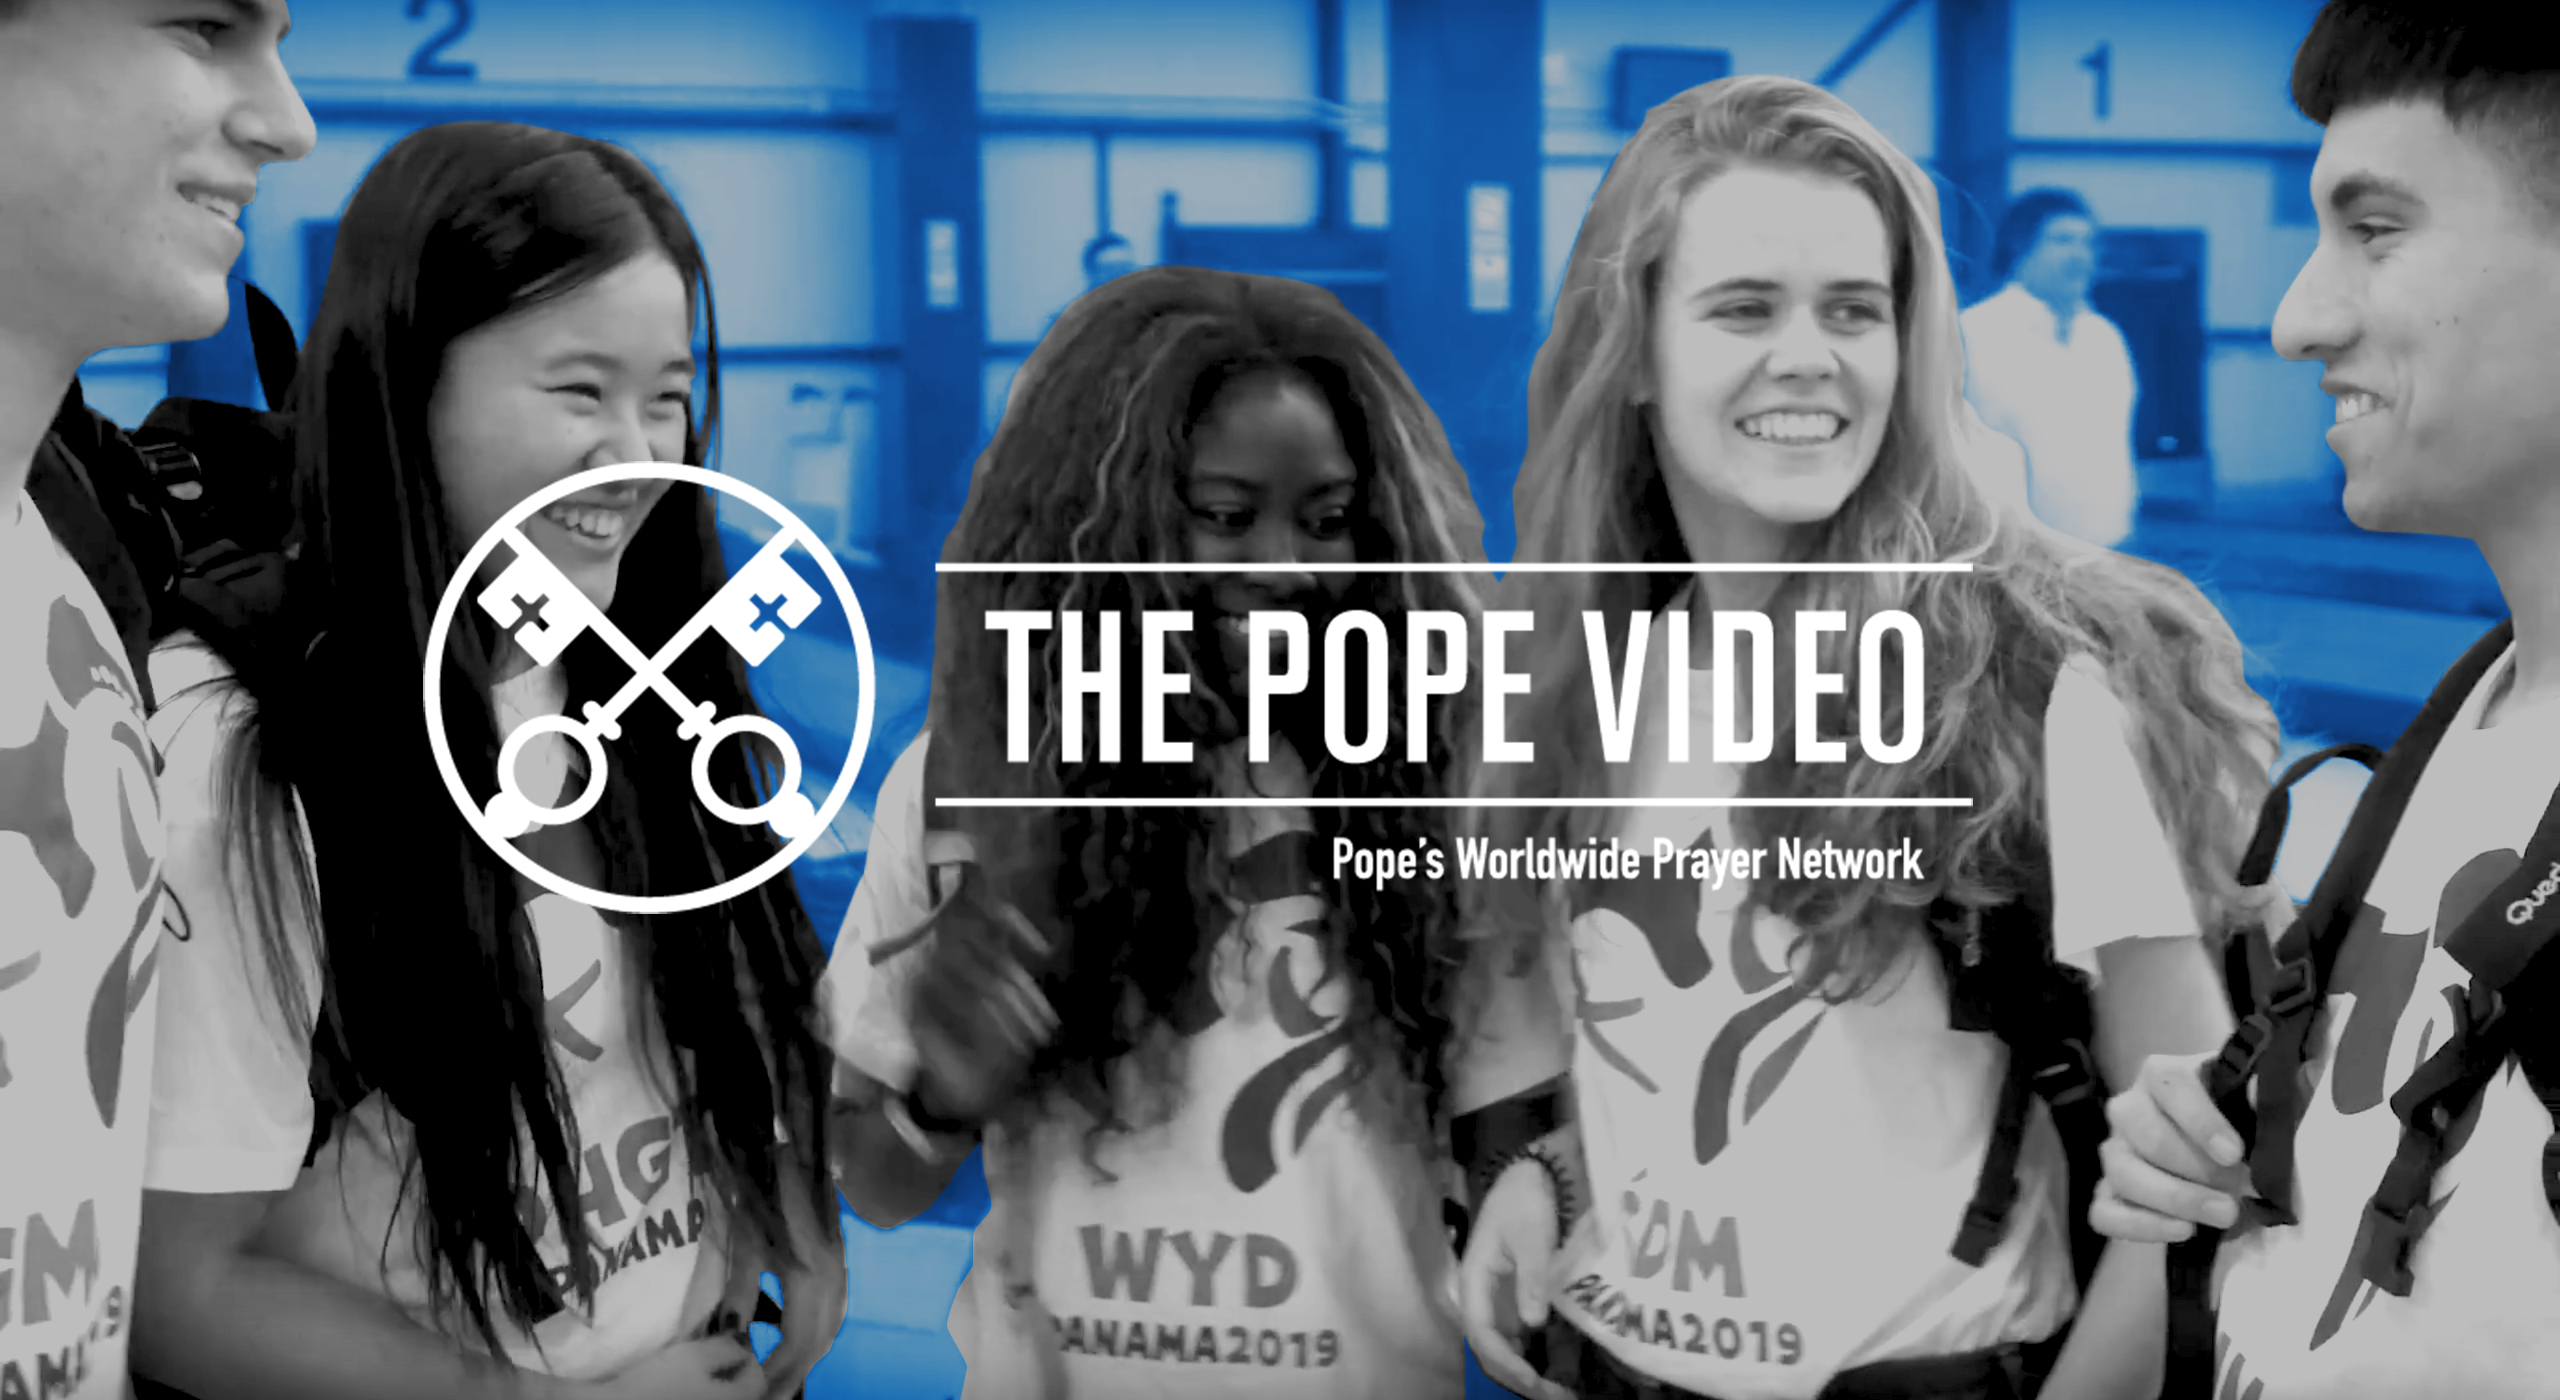 The Pope video for January: Pray that young people follow the example of Mary and communicate the Gospel joyfully